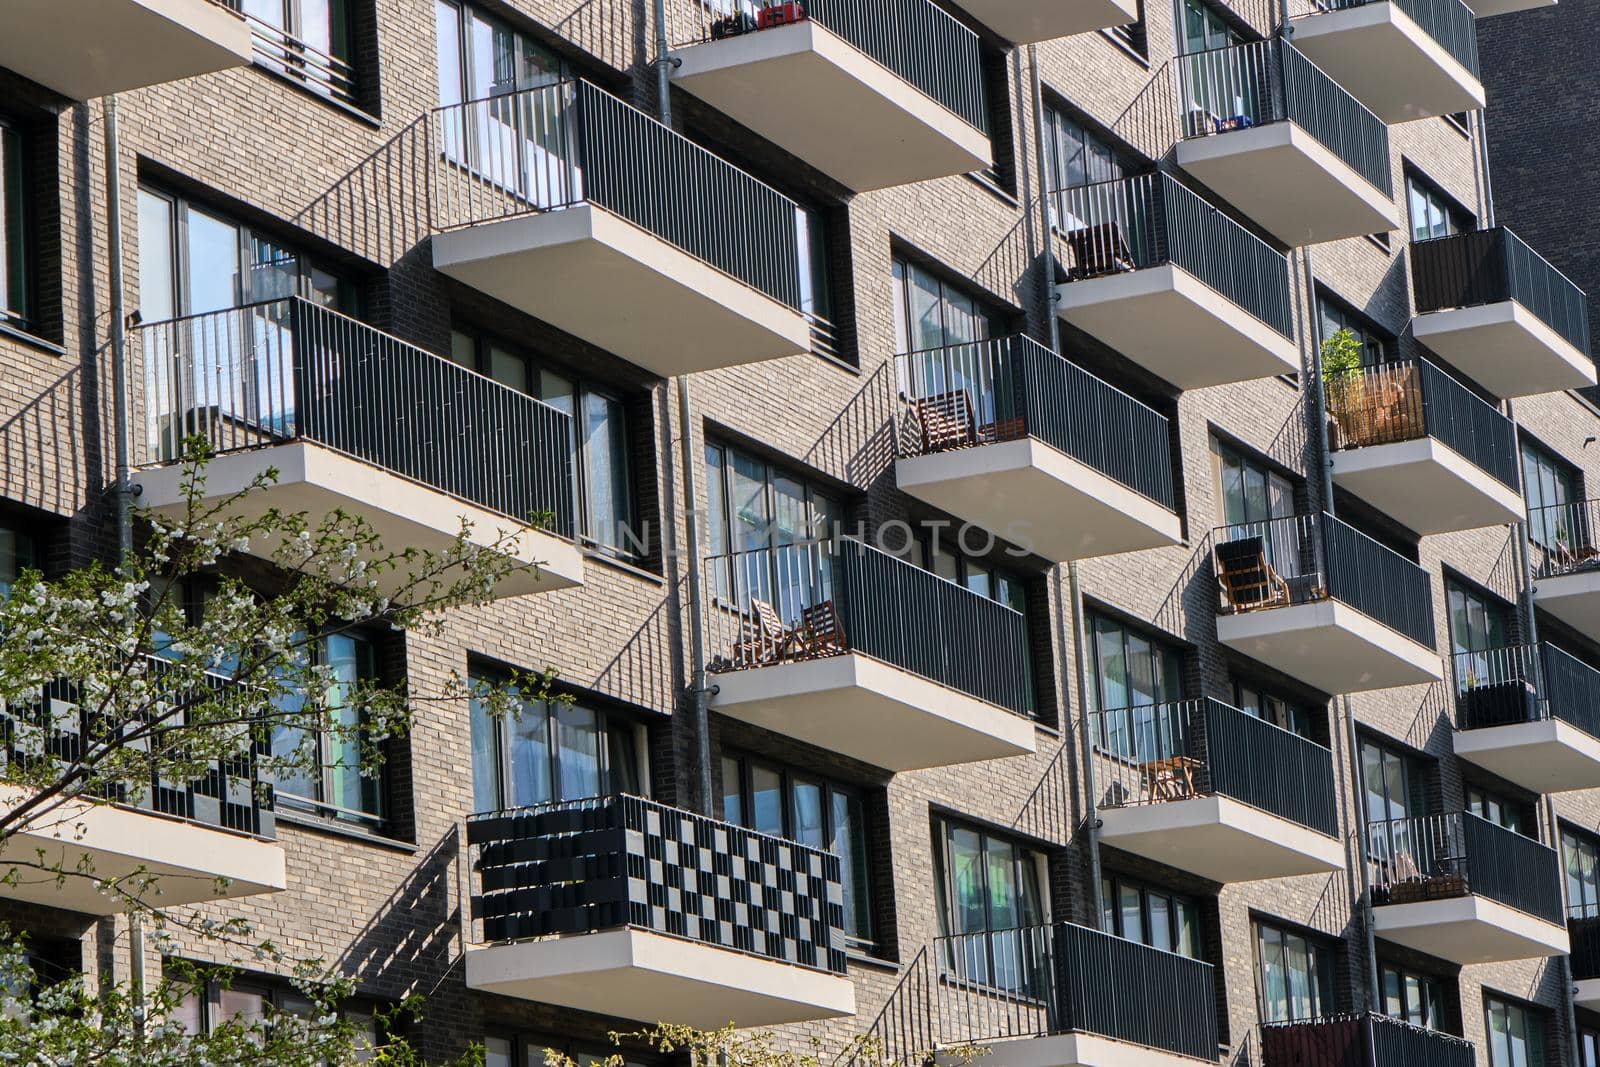 Detail of the facade of a modern apartment building with many balconies